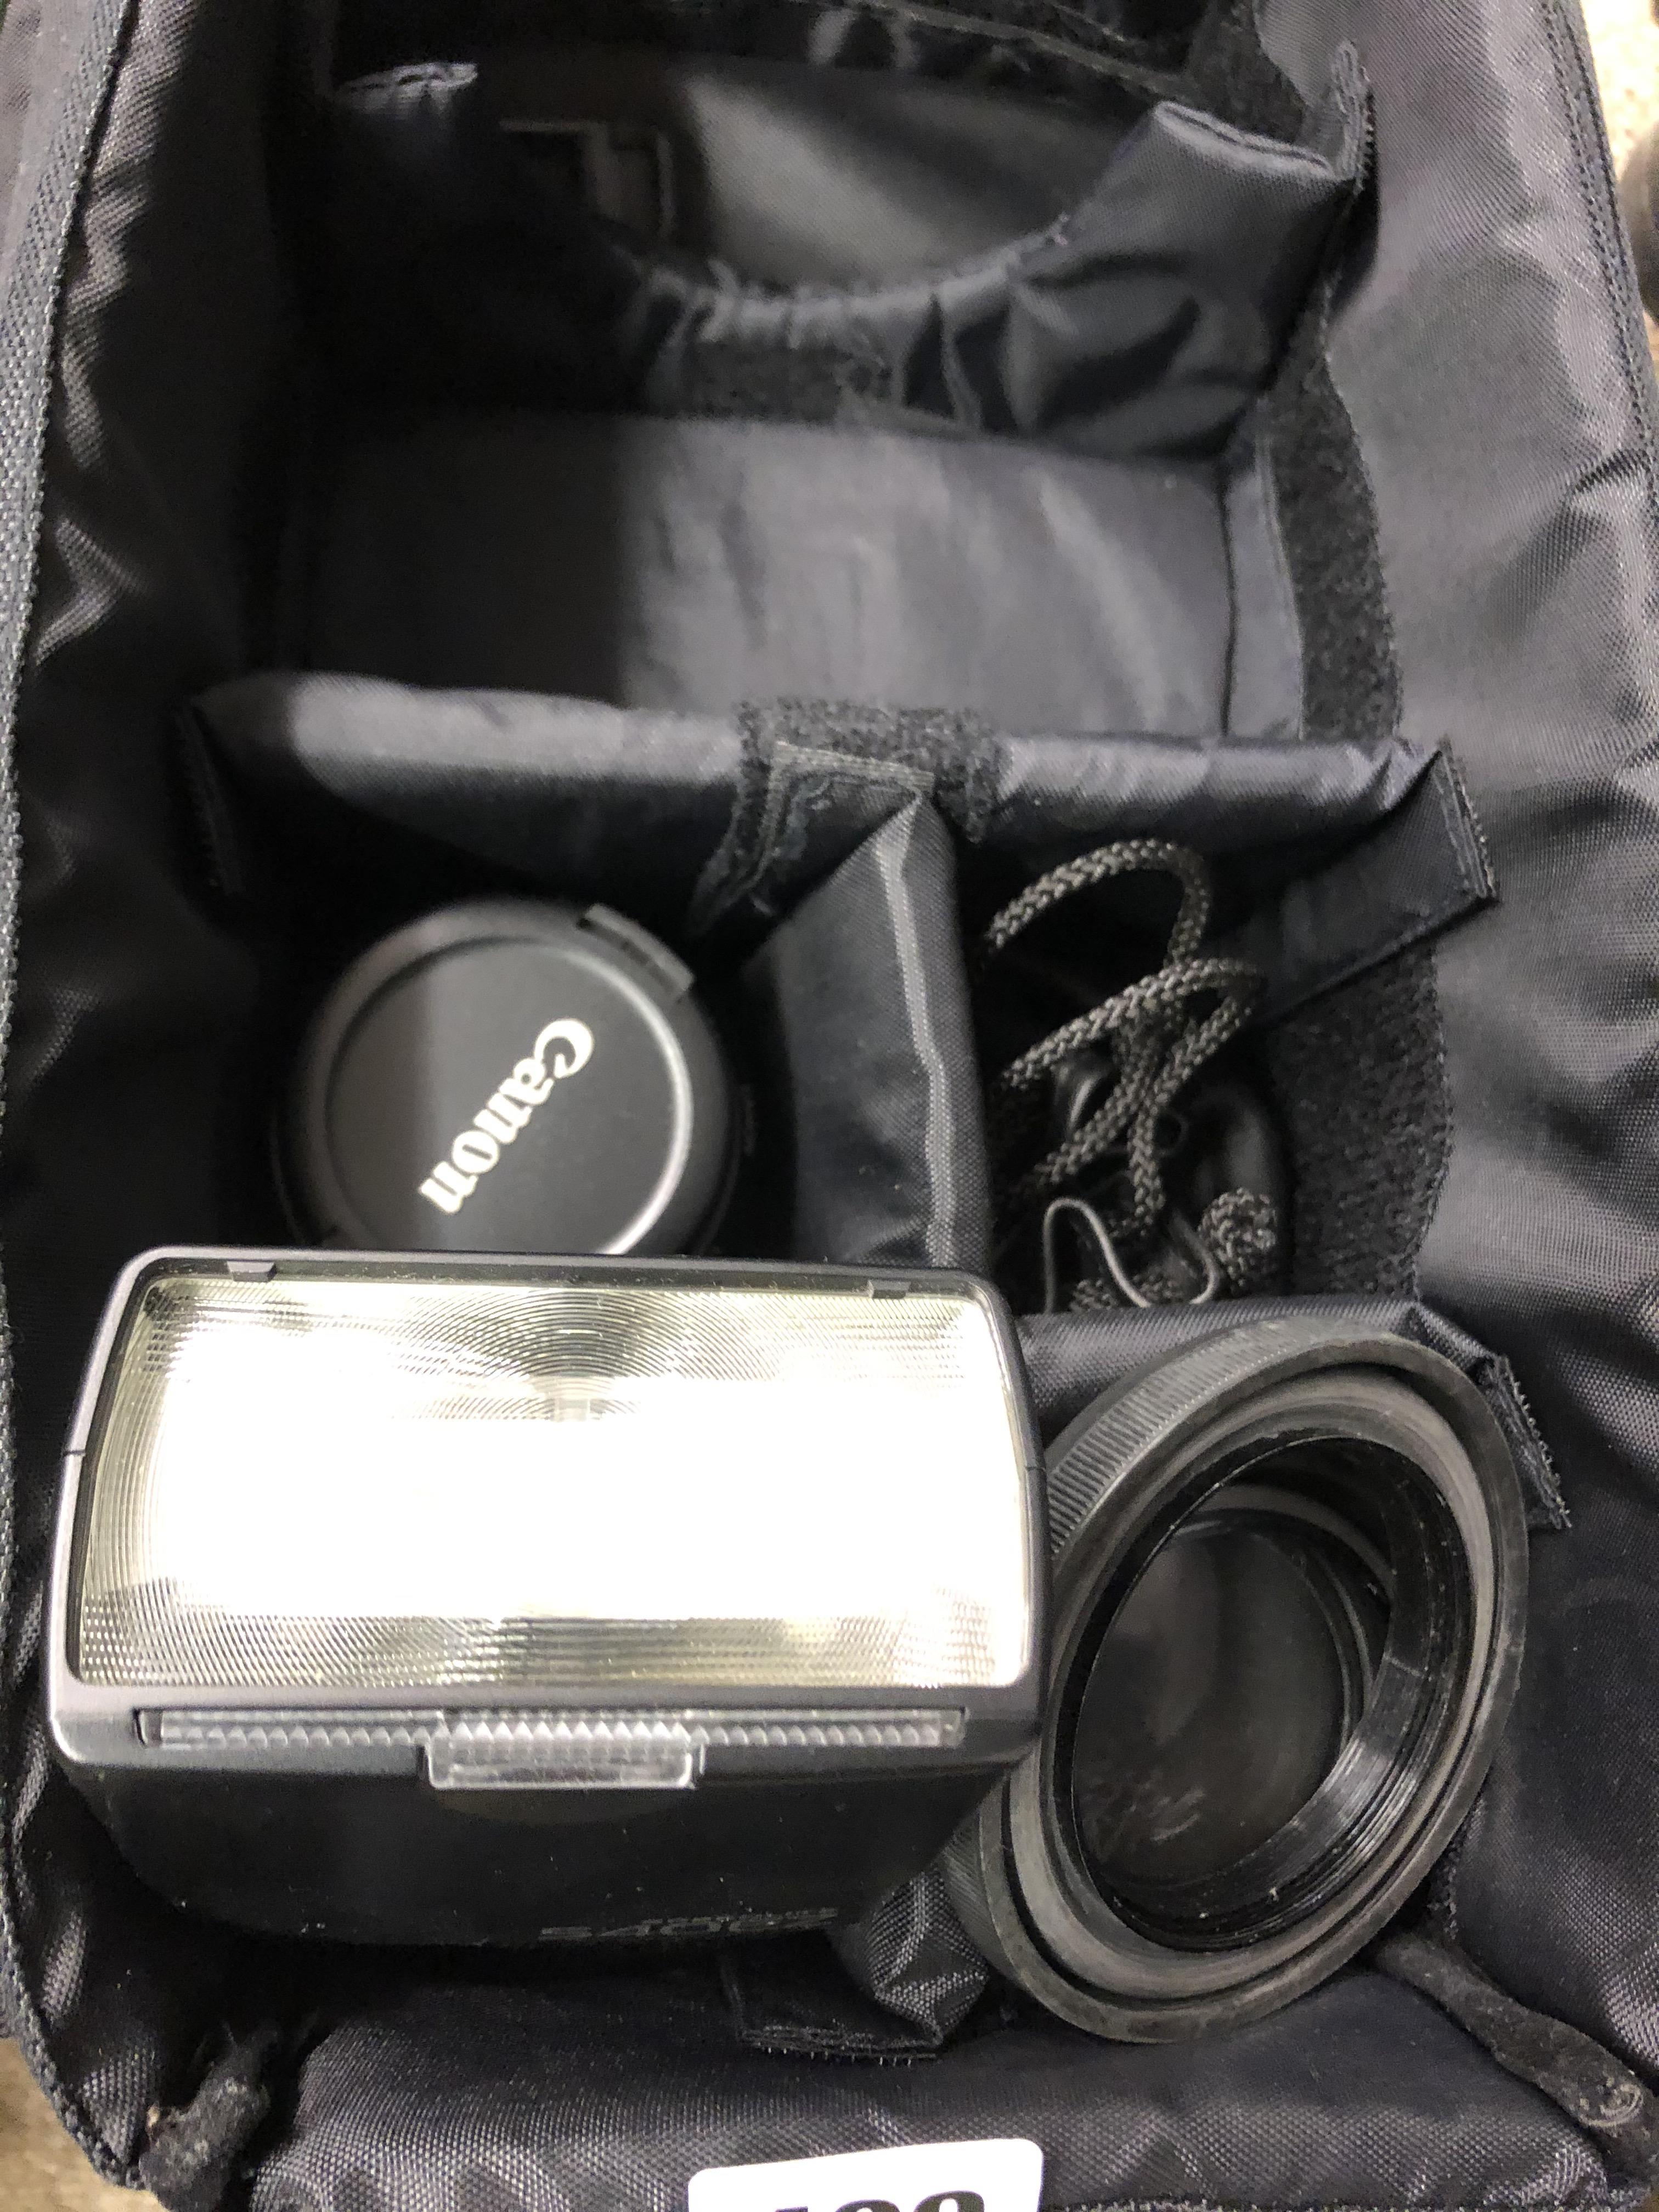 NYLON CARRY CASE WITH CANON EOS500 CAMERA, LENSES, FLASH, FILTERS AND TRIPOD. - Image 3 of 4